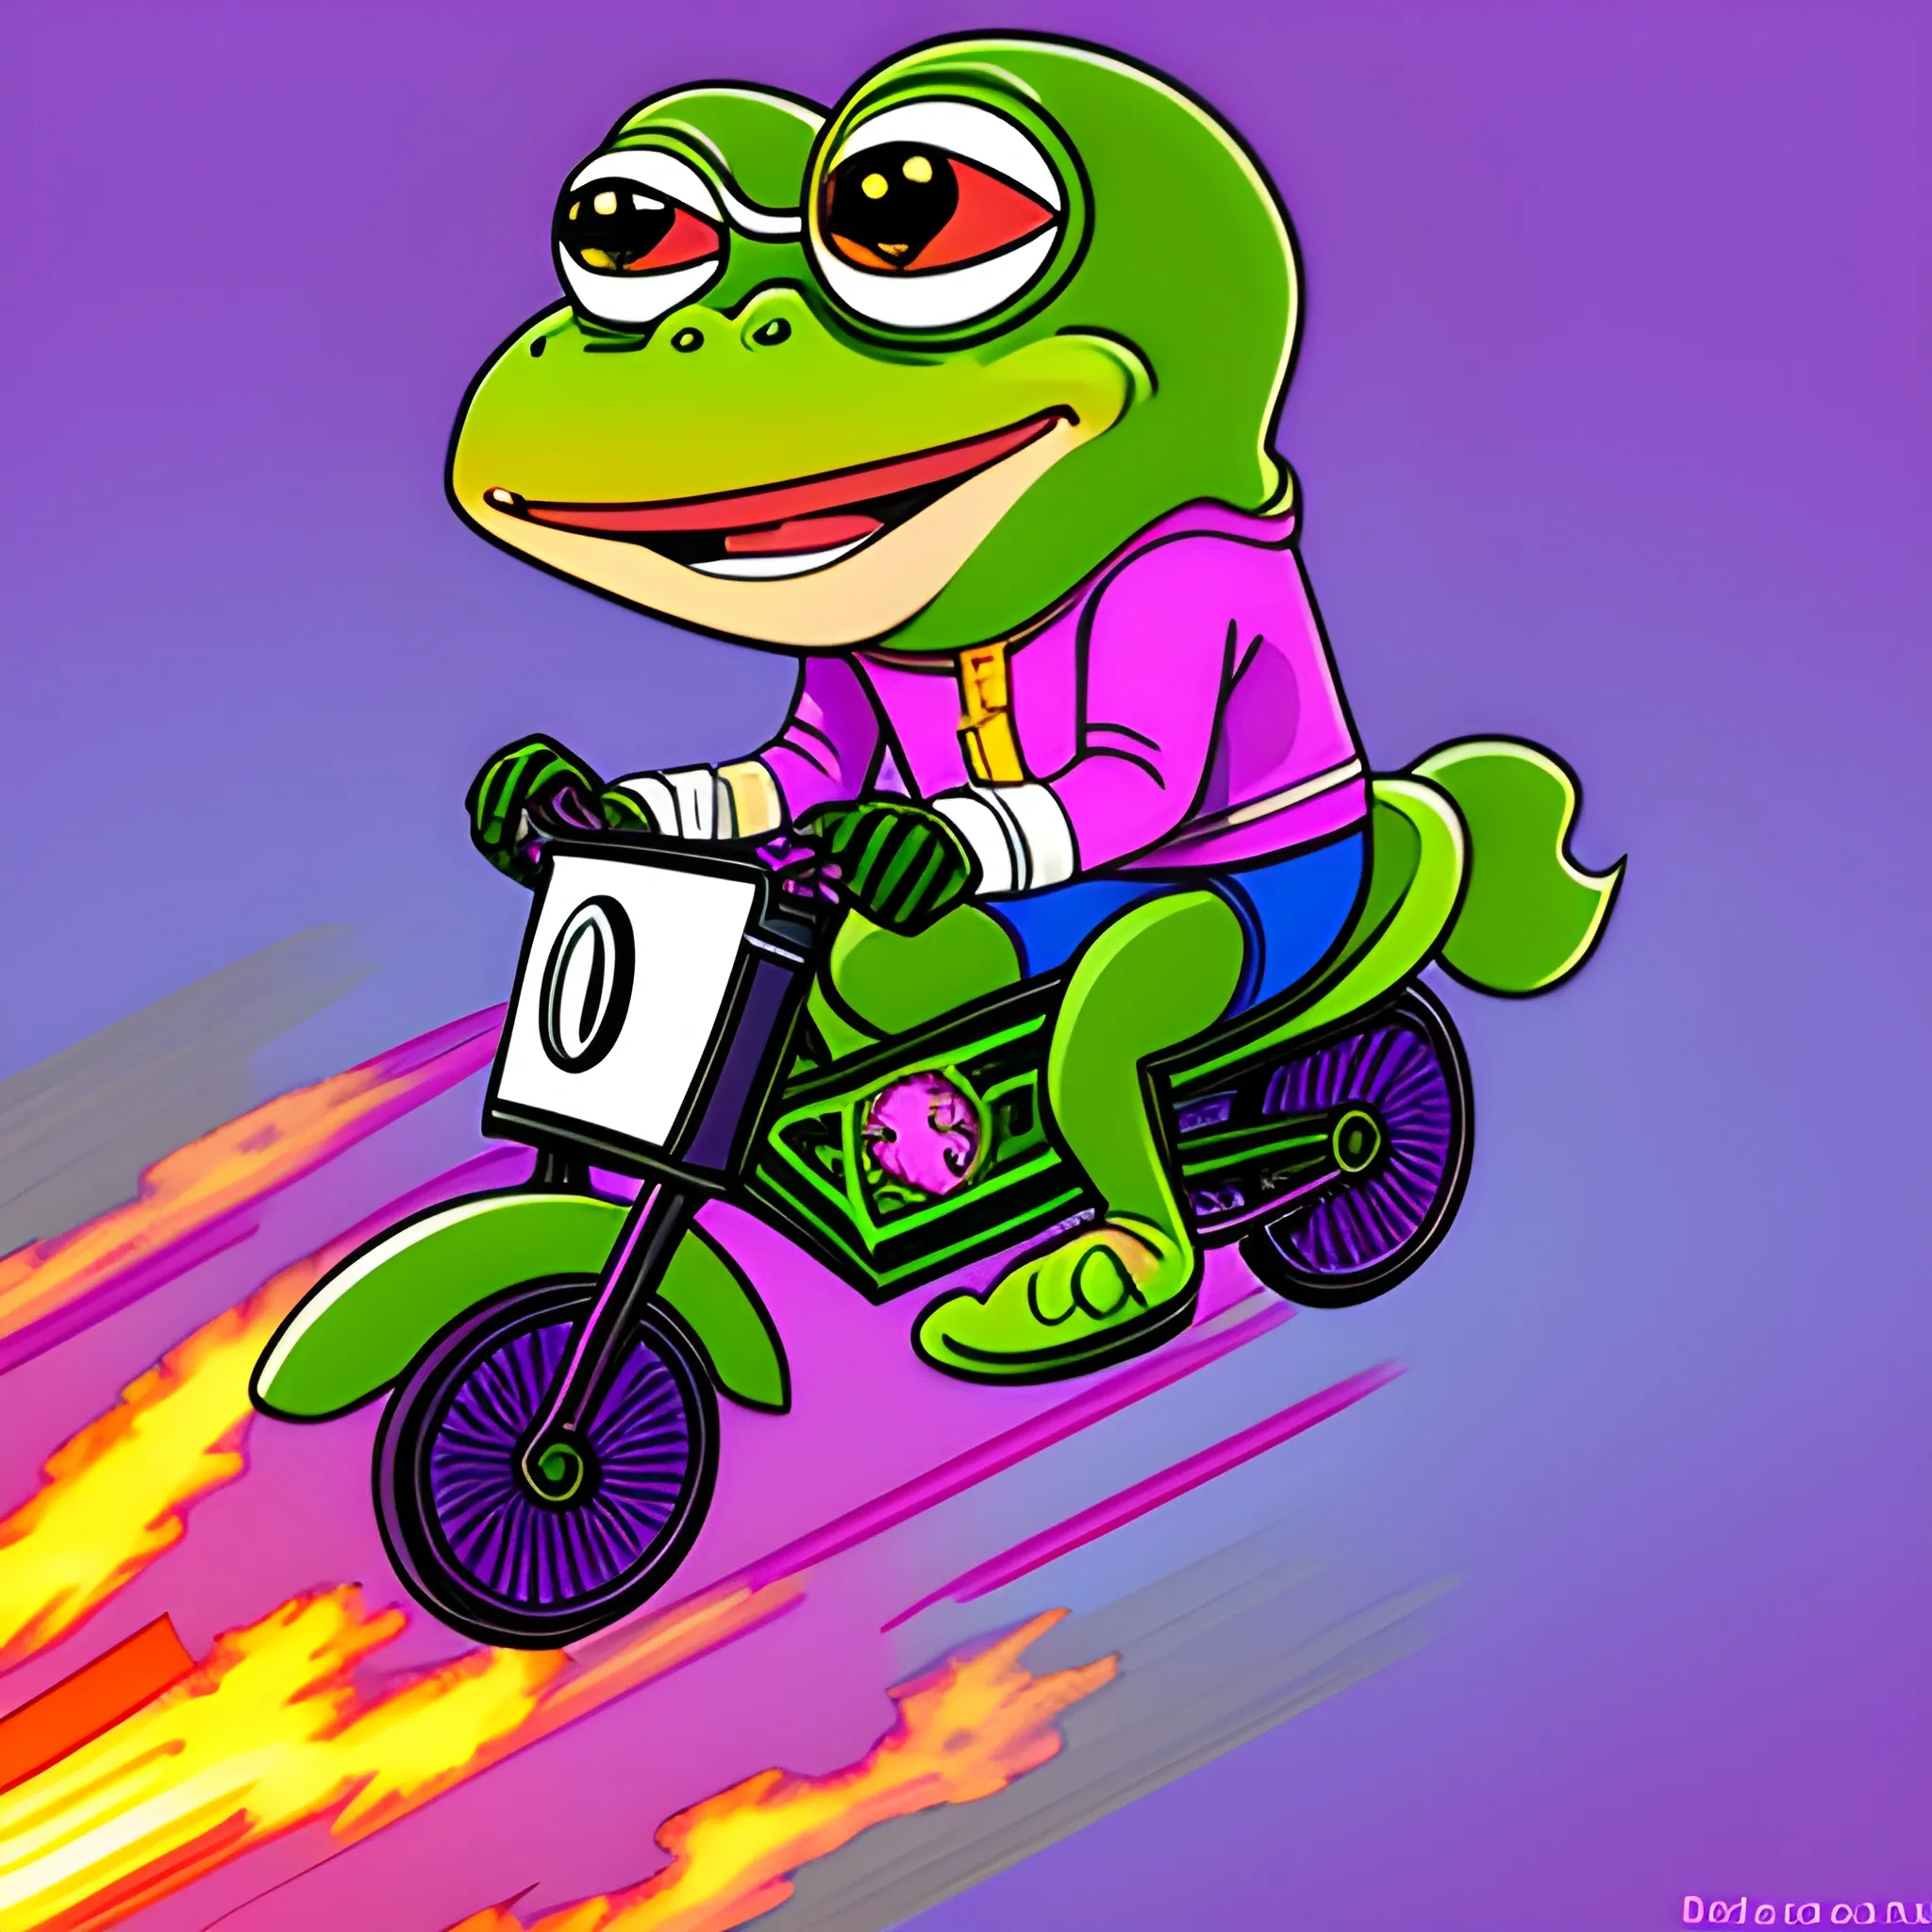 purple Pepe frog riding a rocket labeled "Monad" with flames shooting out the back with a speedometer showing "10,000 transactions per second", Cartoon